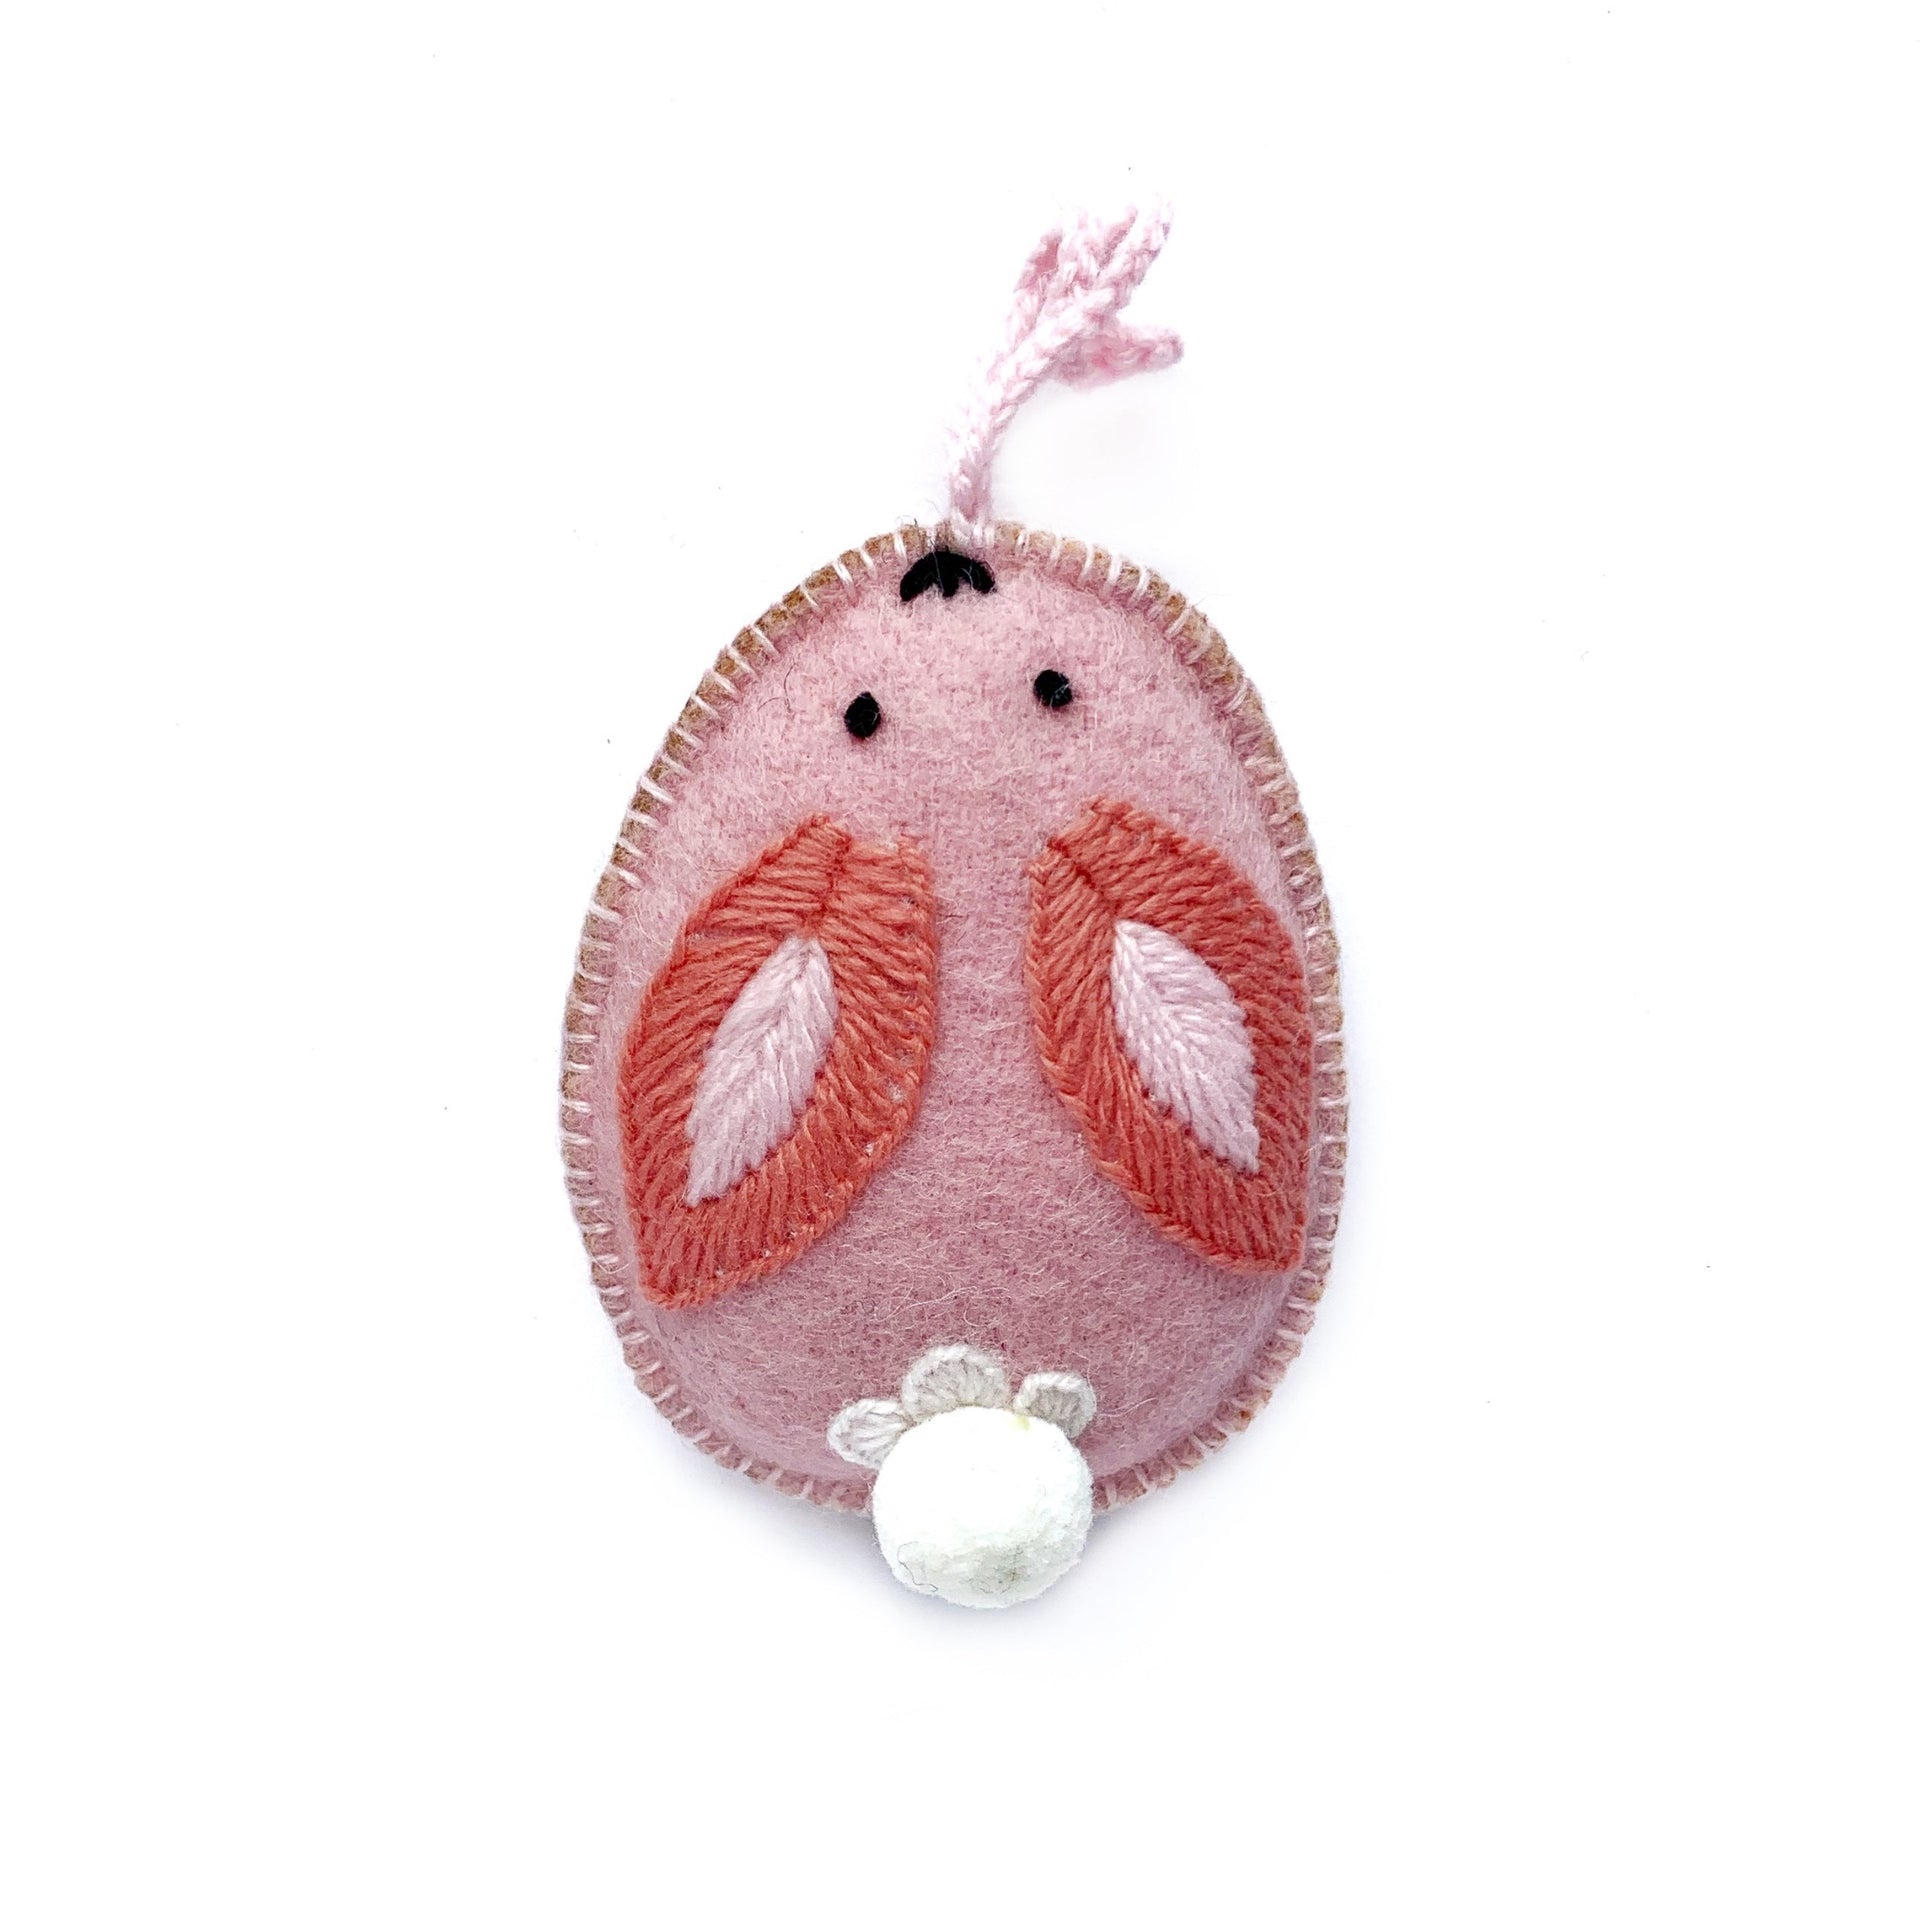 pink bunny egg Easter ornament with pom pom tail.